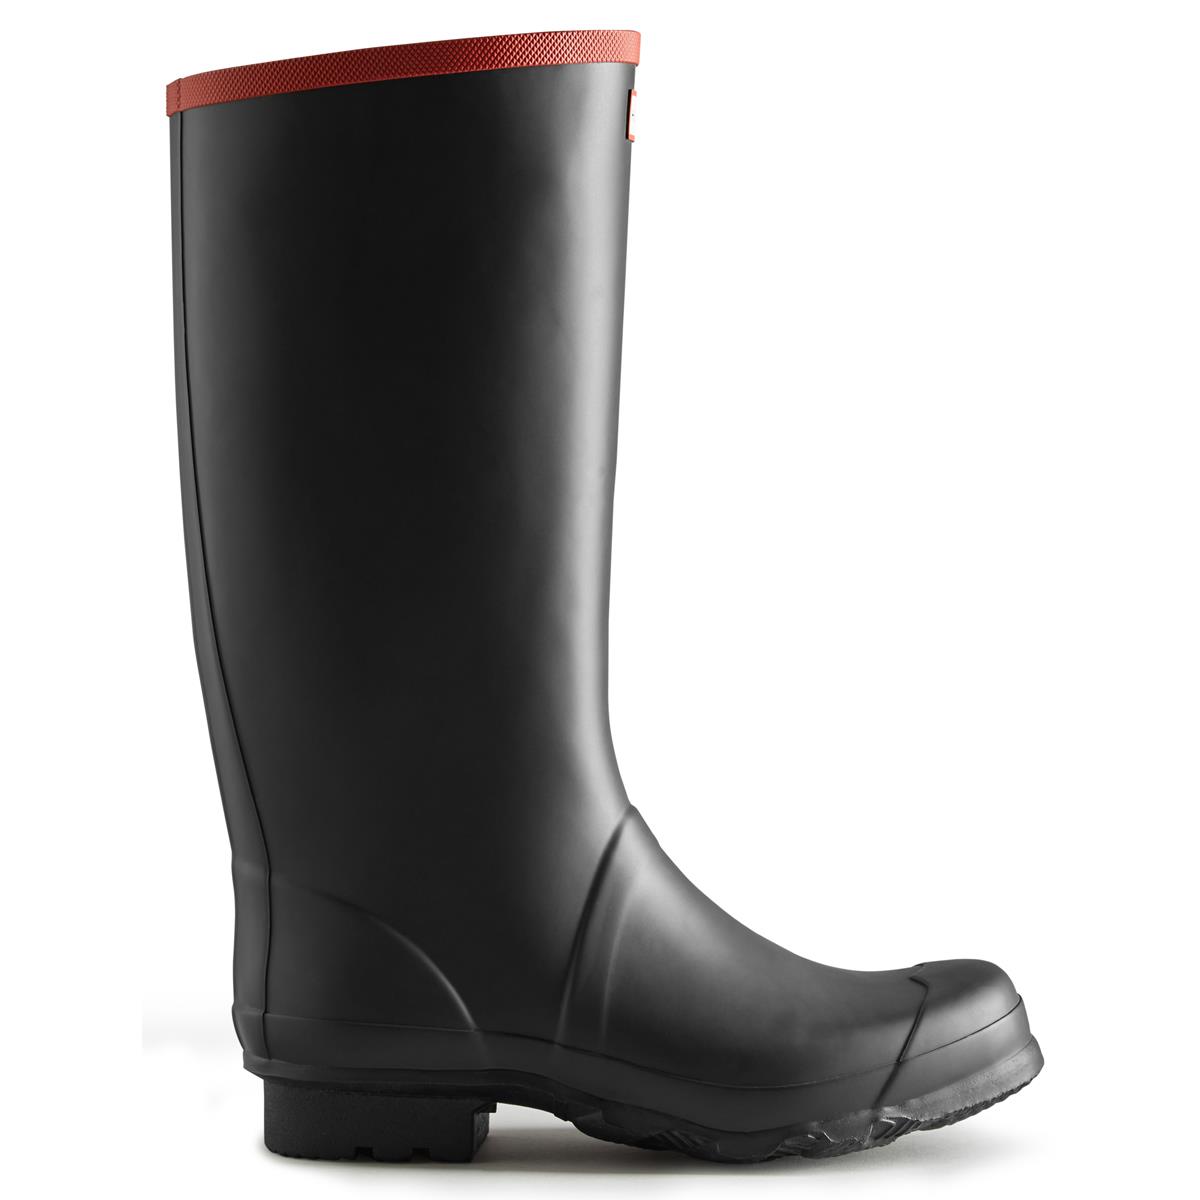 Are hunter boots unisex?